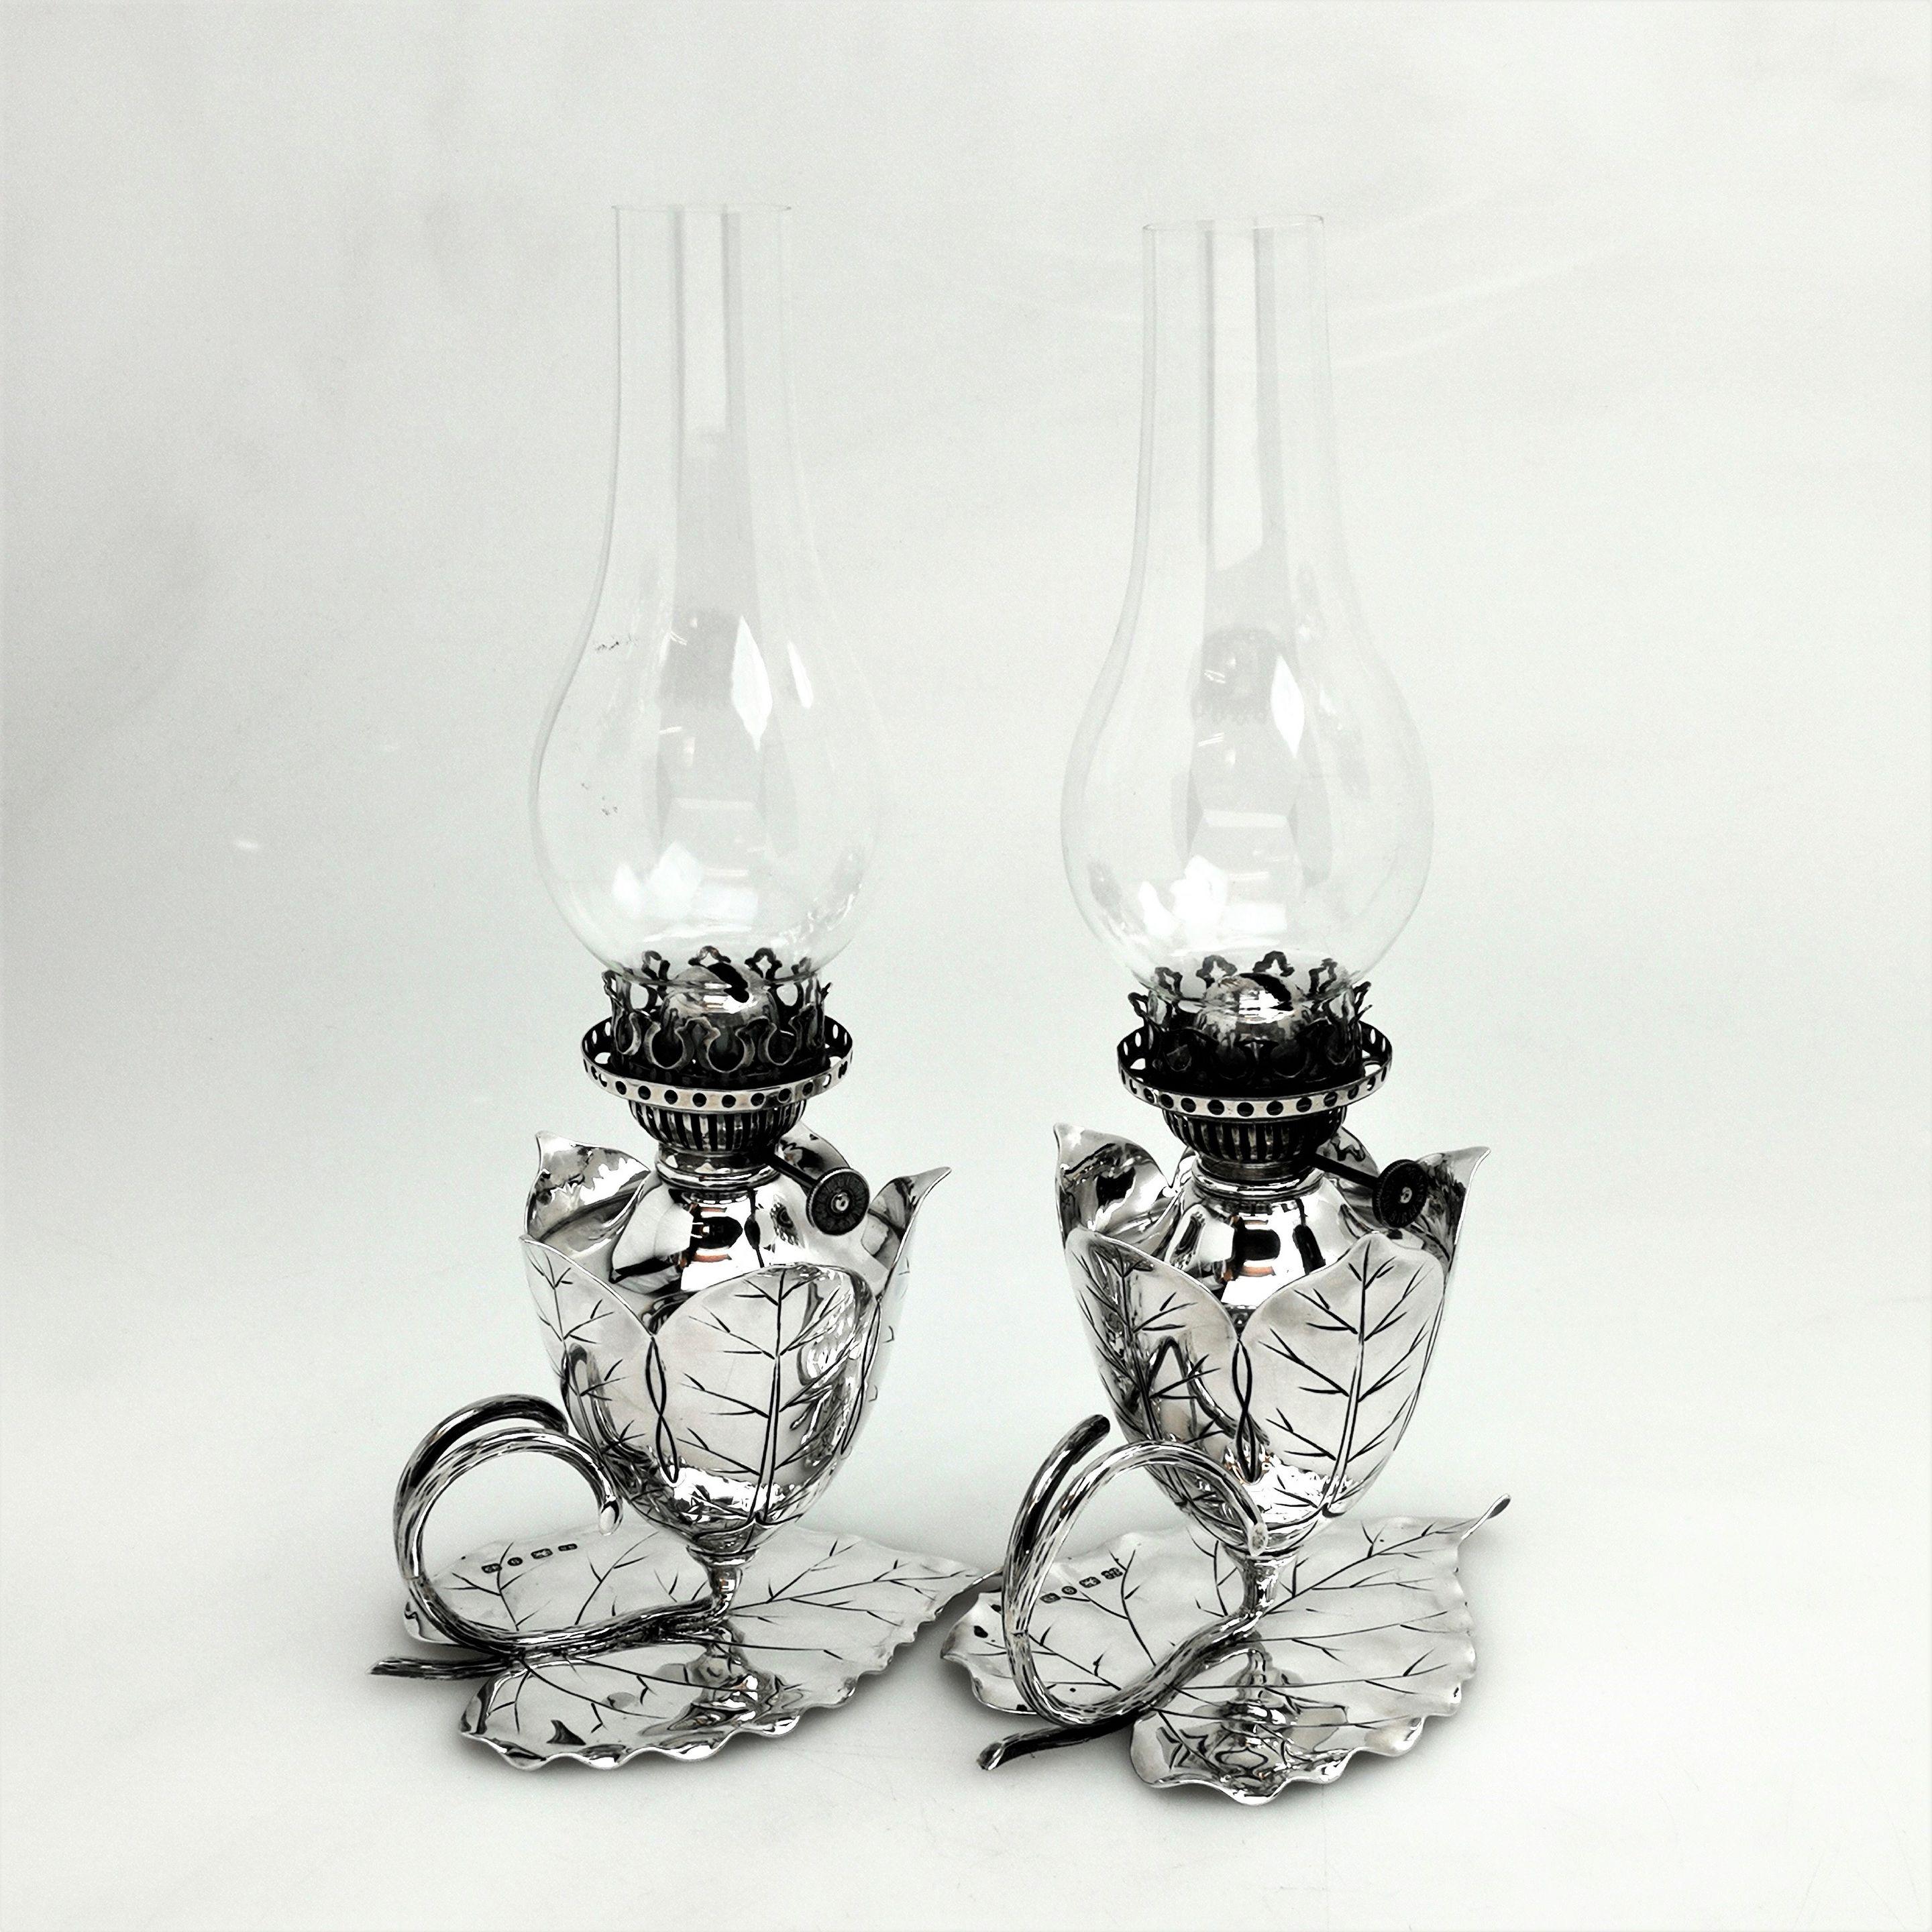 A magnificent pair of Antique Victorian solid Silver Oil Lamps with silver bases and clear glass push fit storm shades. The bases of the silver lamps are unusually shaped with a wide leaf foot and the body of the lamps made is of an open flower with